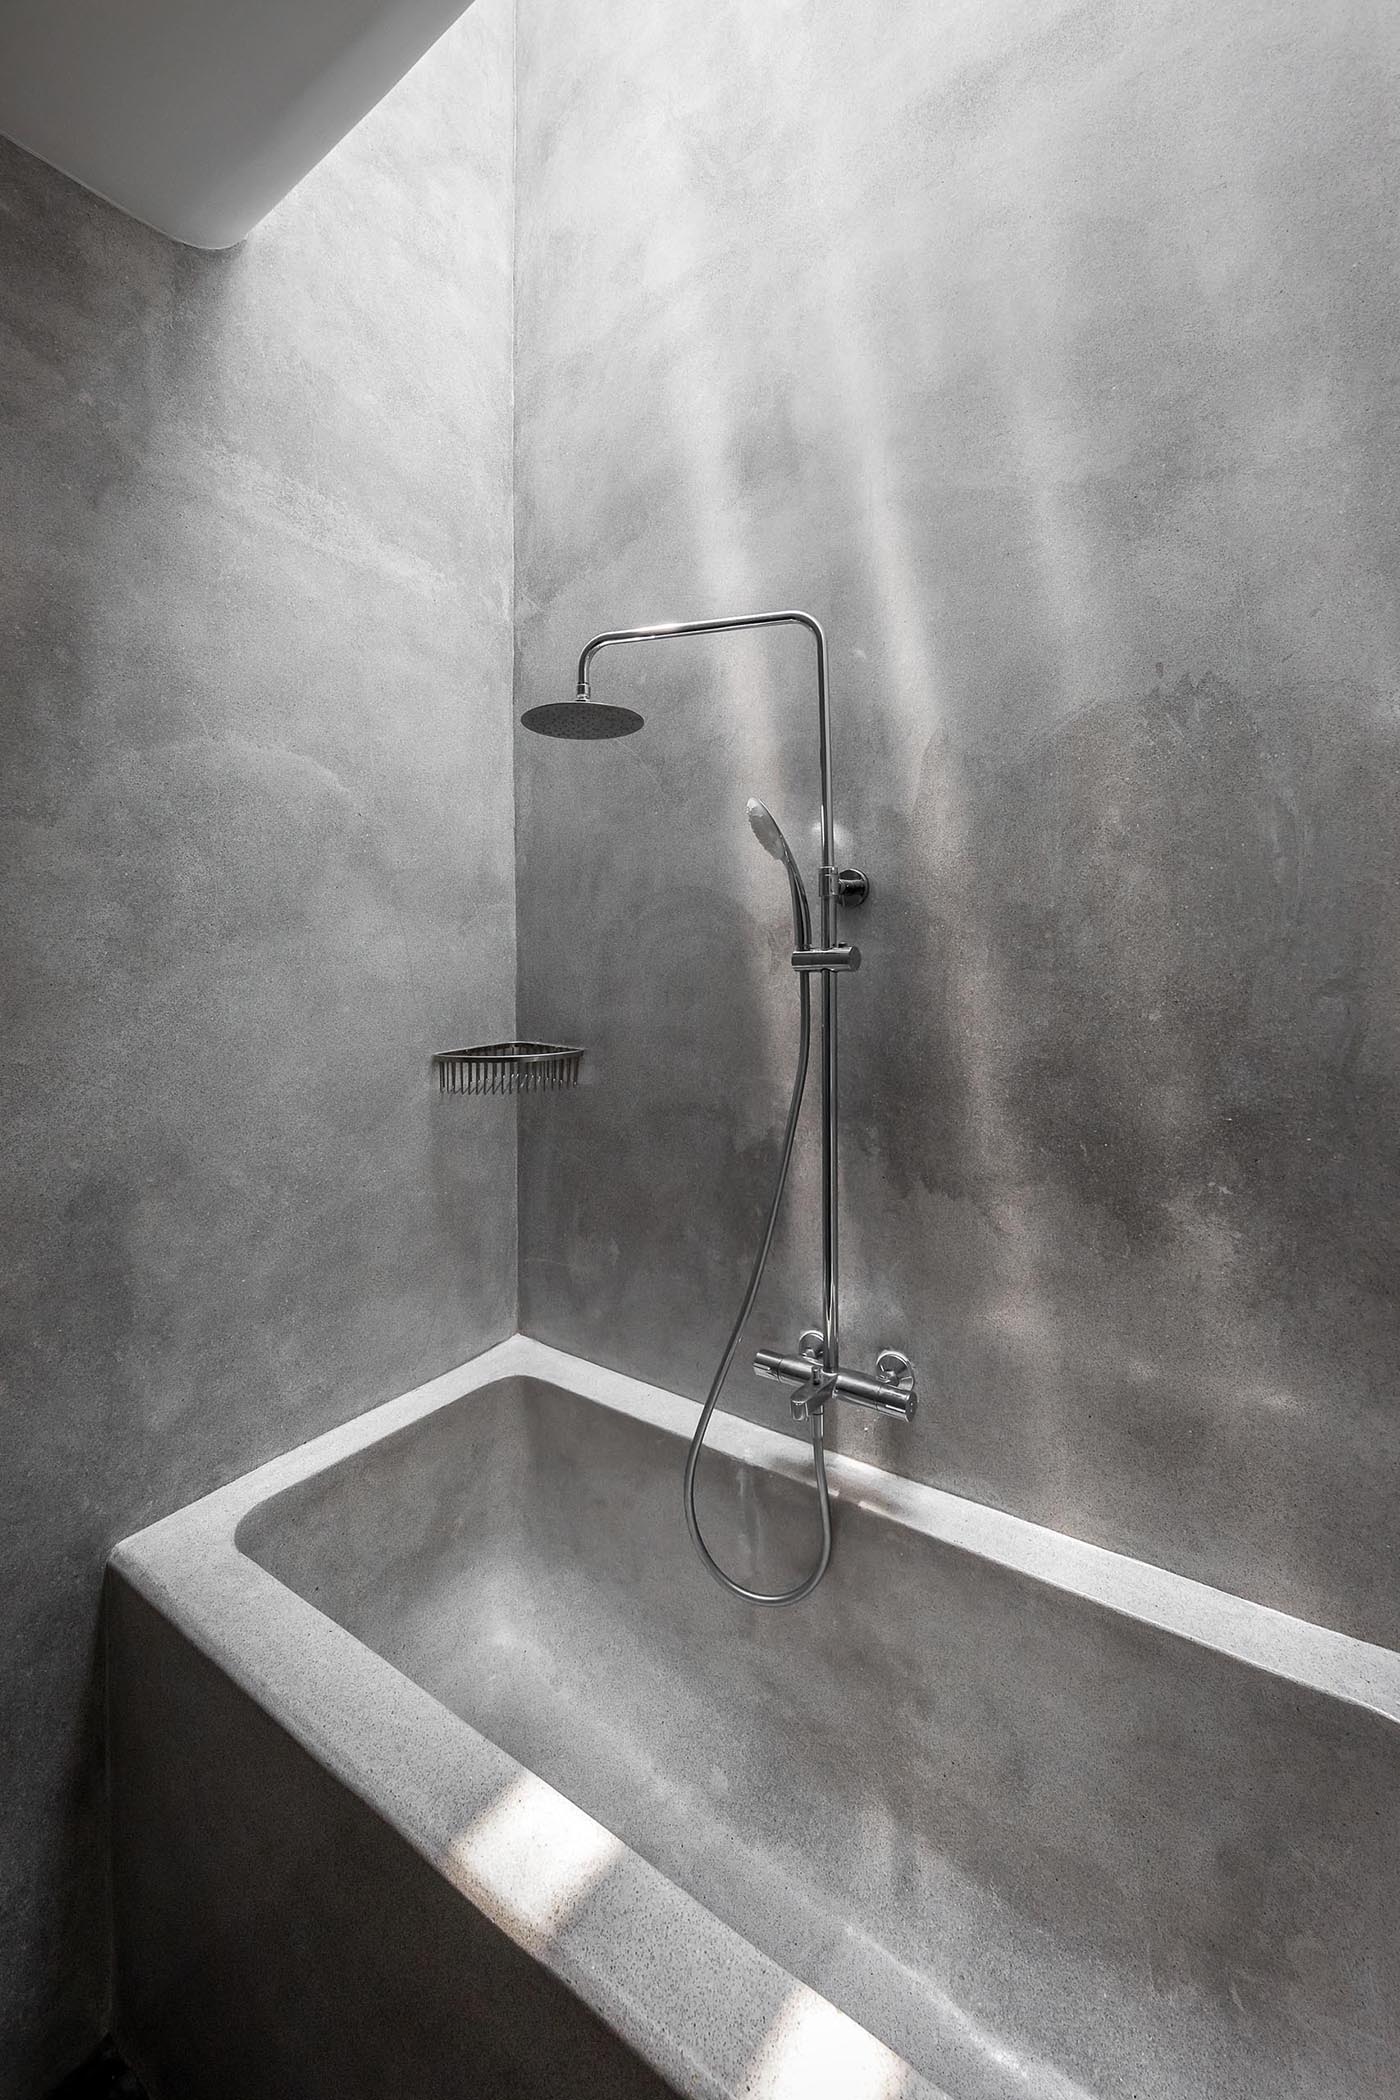 A modern grey bathroom with a frosted door, as well as a built-in bathtub.